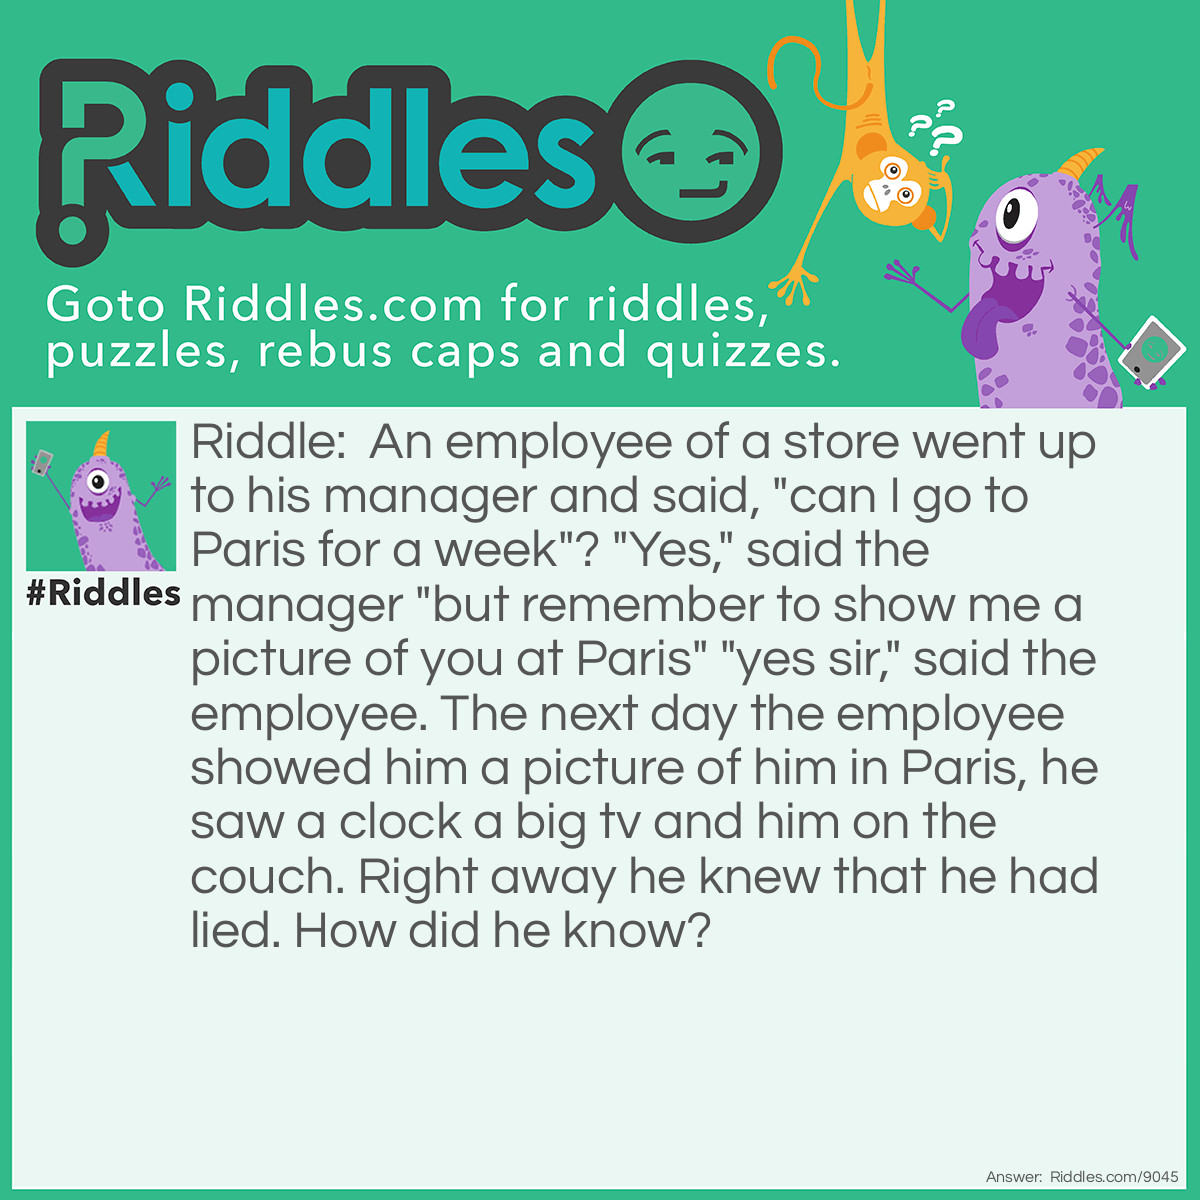 Riddle: An employee of a store went up to his manager and said, "can I go to Paris for a week"? "Yes," said the manager "but remember to show me a picture of you at Paris" "yes sir," said the employee. The next day the employee showed him a picture of him in Paris, he saw a clock a big tv and him on the couch. Right away he knew that he had lied. How did he know? Answer: The clock was showing the same time as the clock that was sitting on the manager's wall.